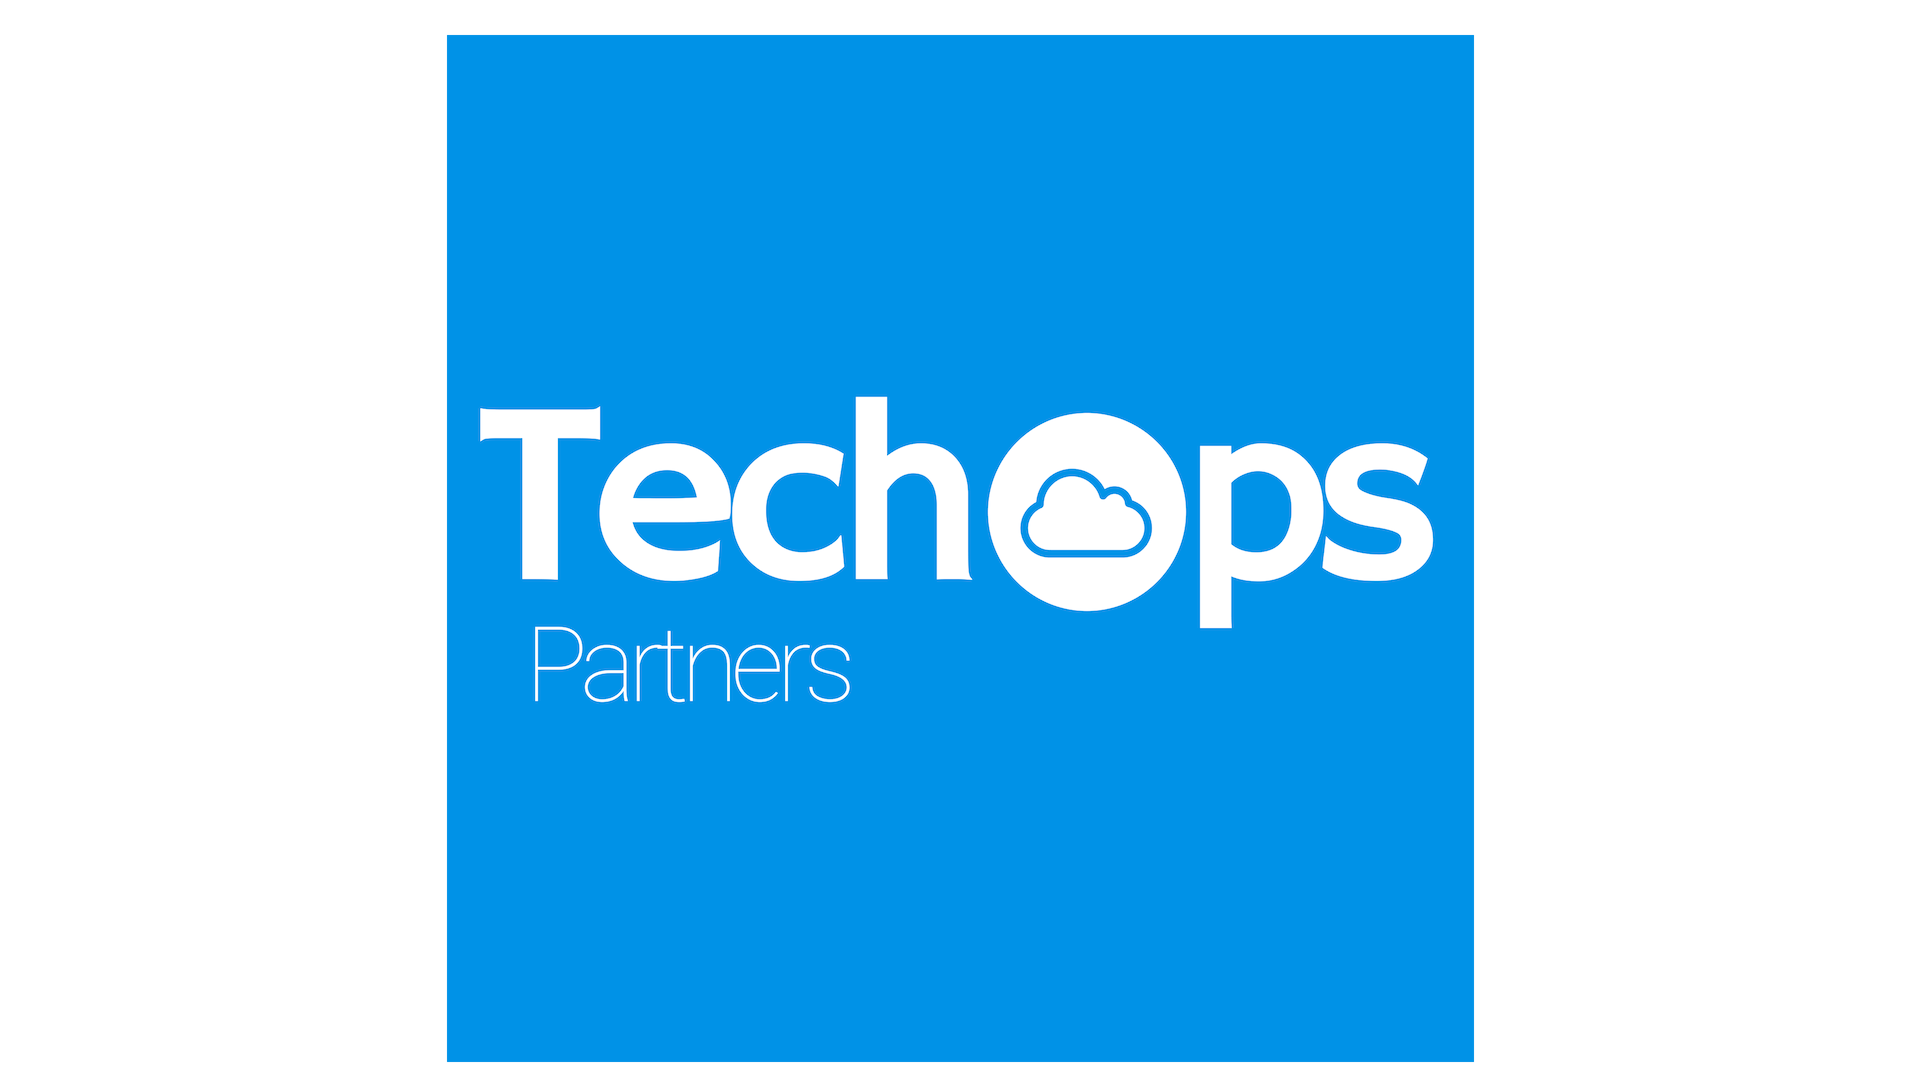 TechOps Partners profile on Qualified.One